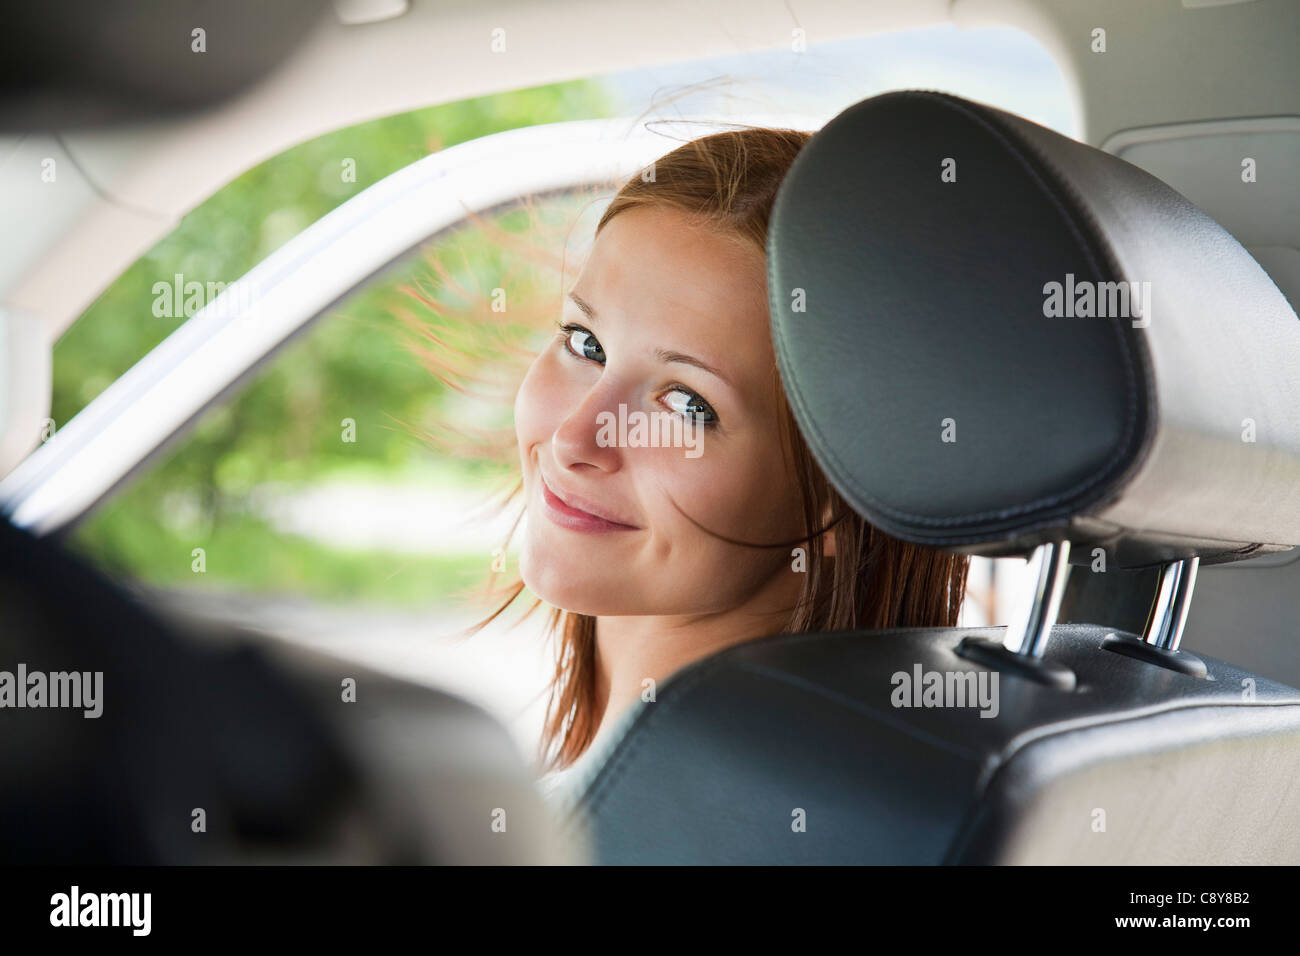 Portrait of young woman sitting in car Banque D'Images